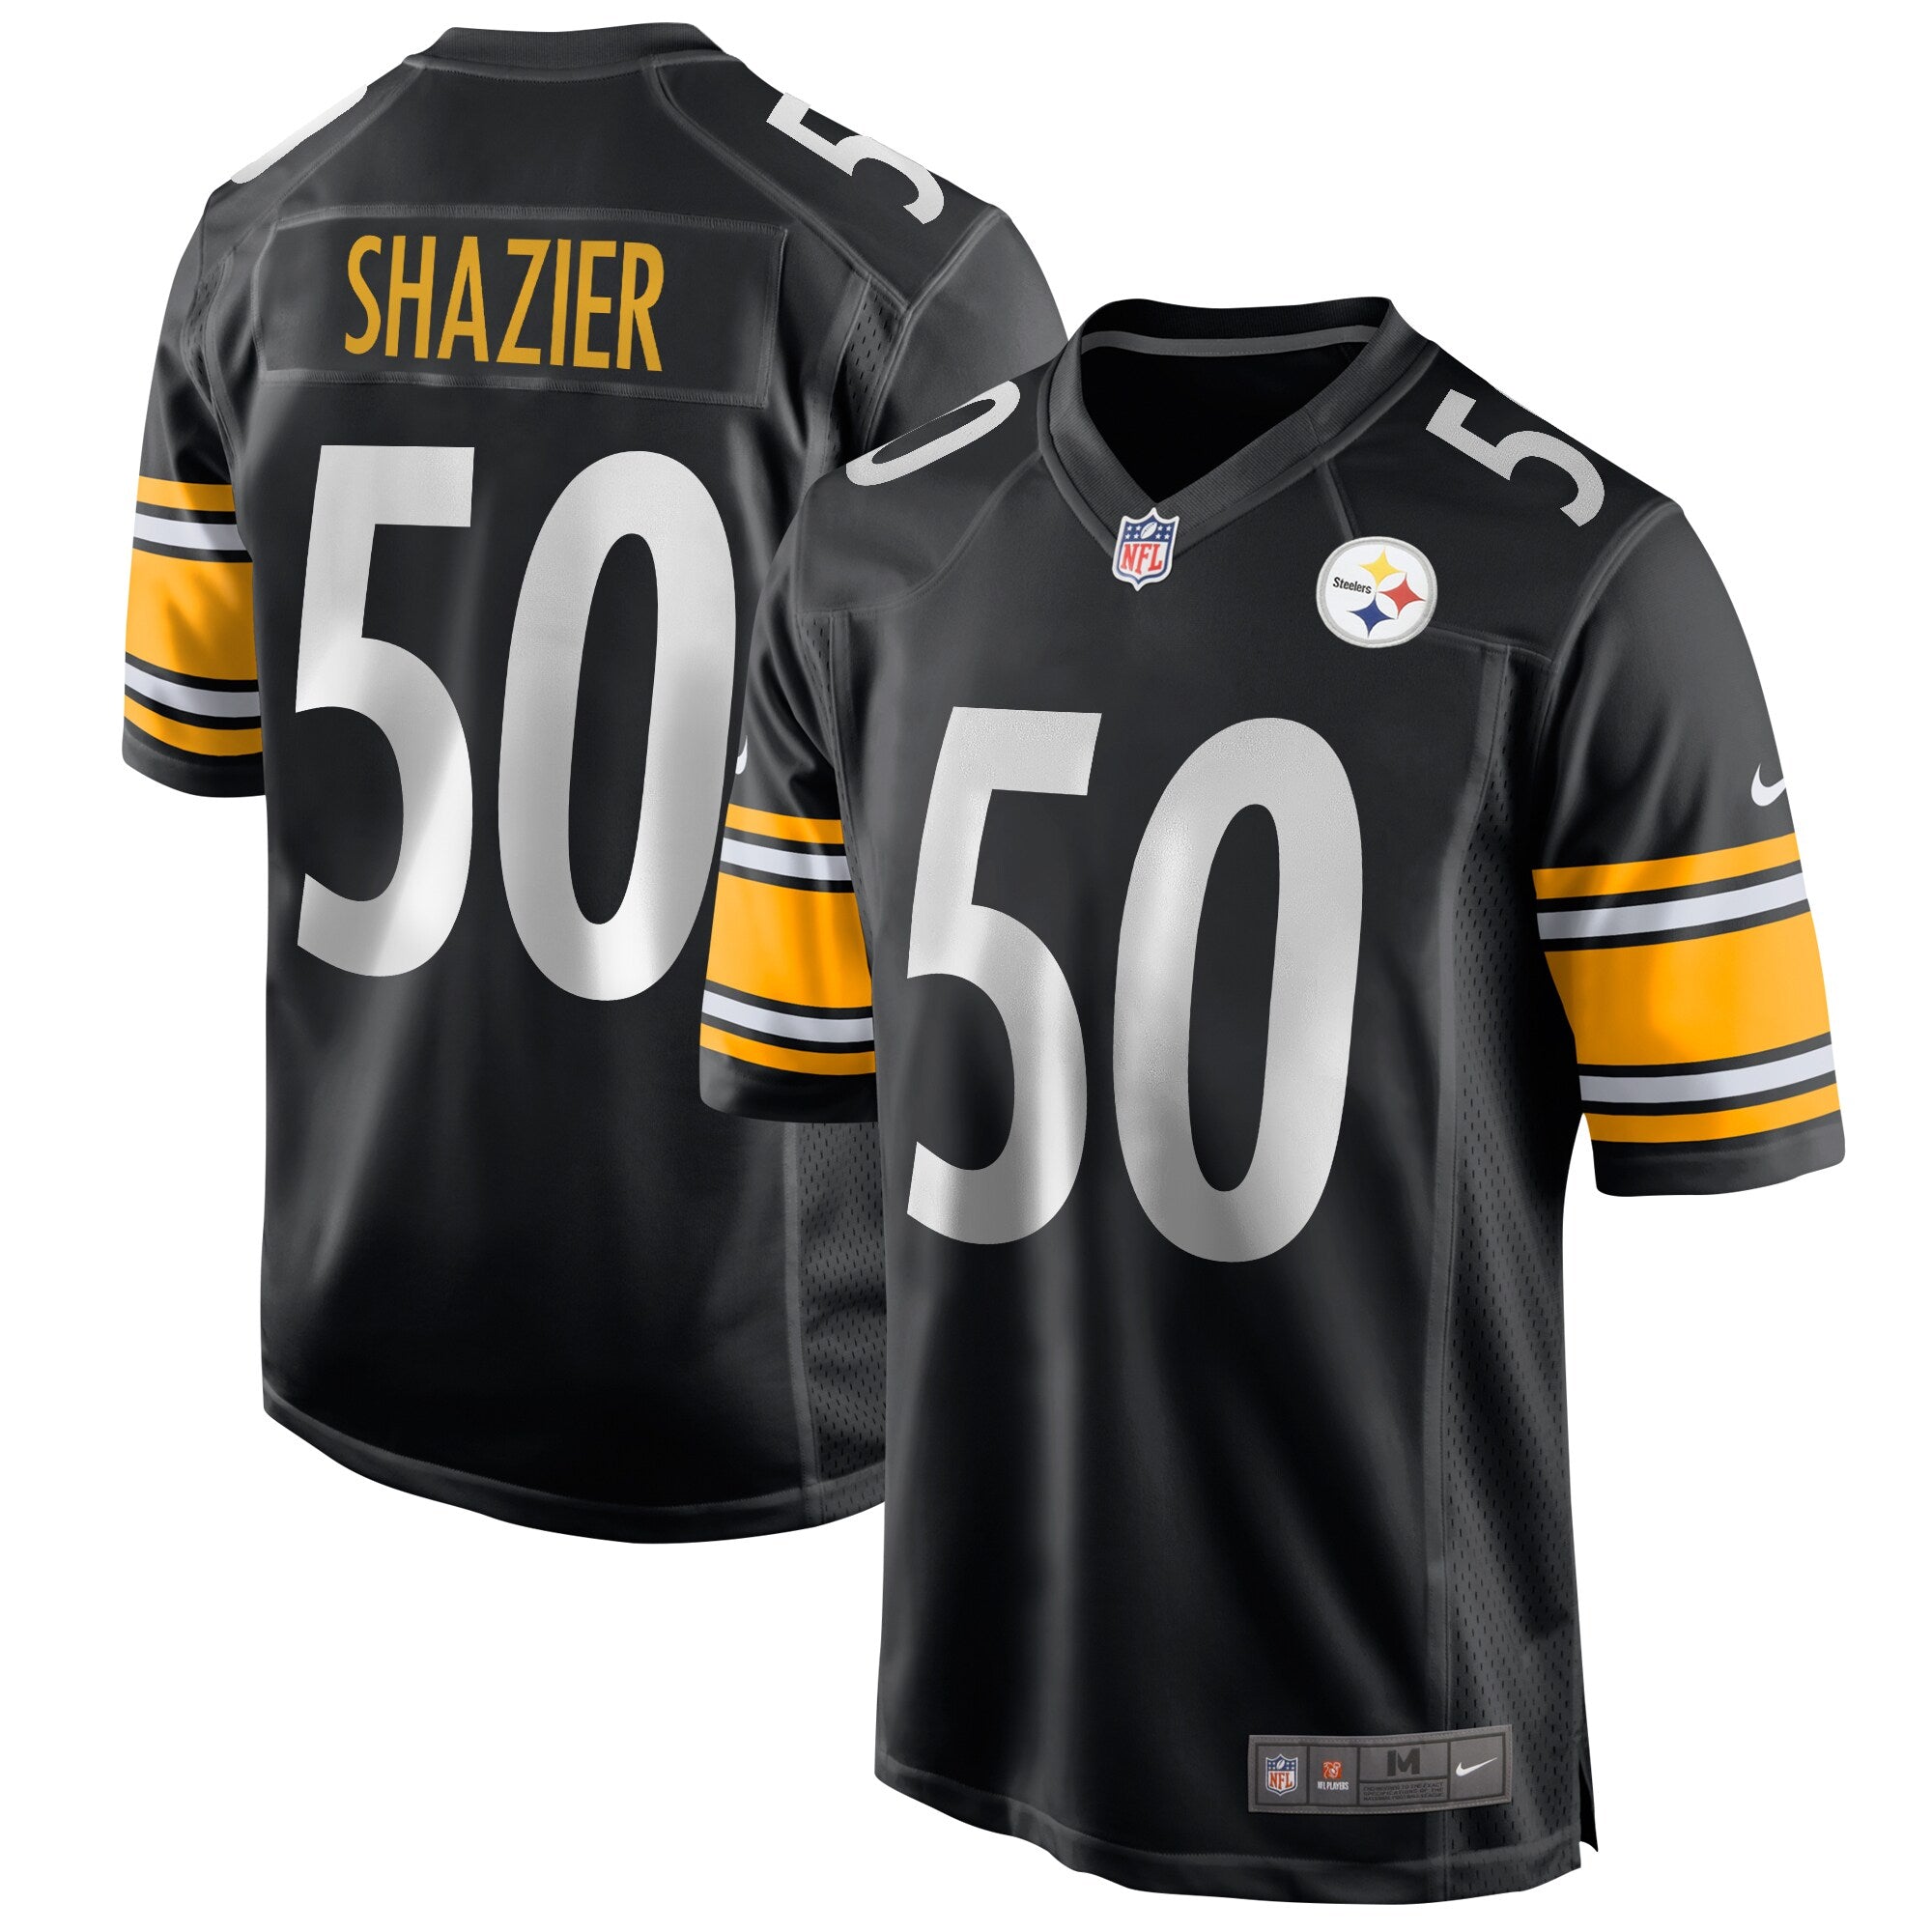 Nike Pittsburgh Steelers No50 Ryan Shazier Black Alternate Men's Stitched NFL Vapor Untouchable Limited Jersey